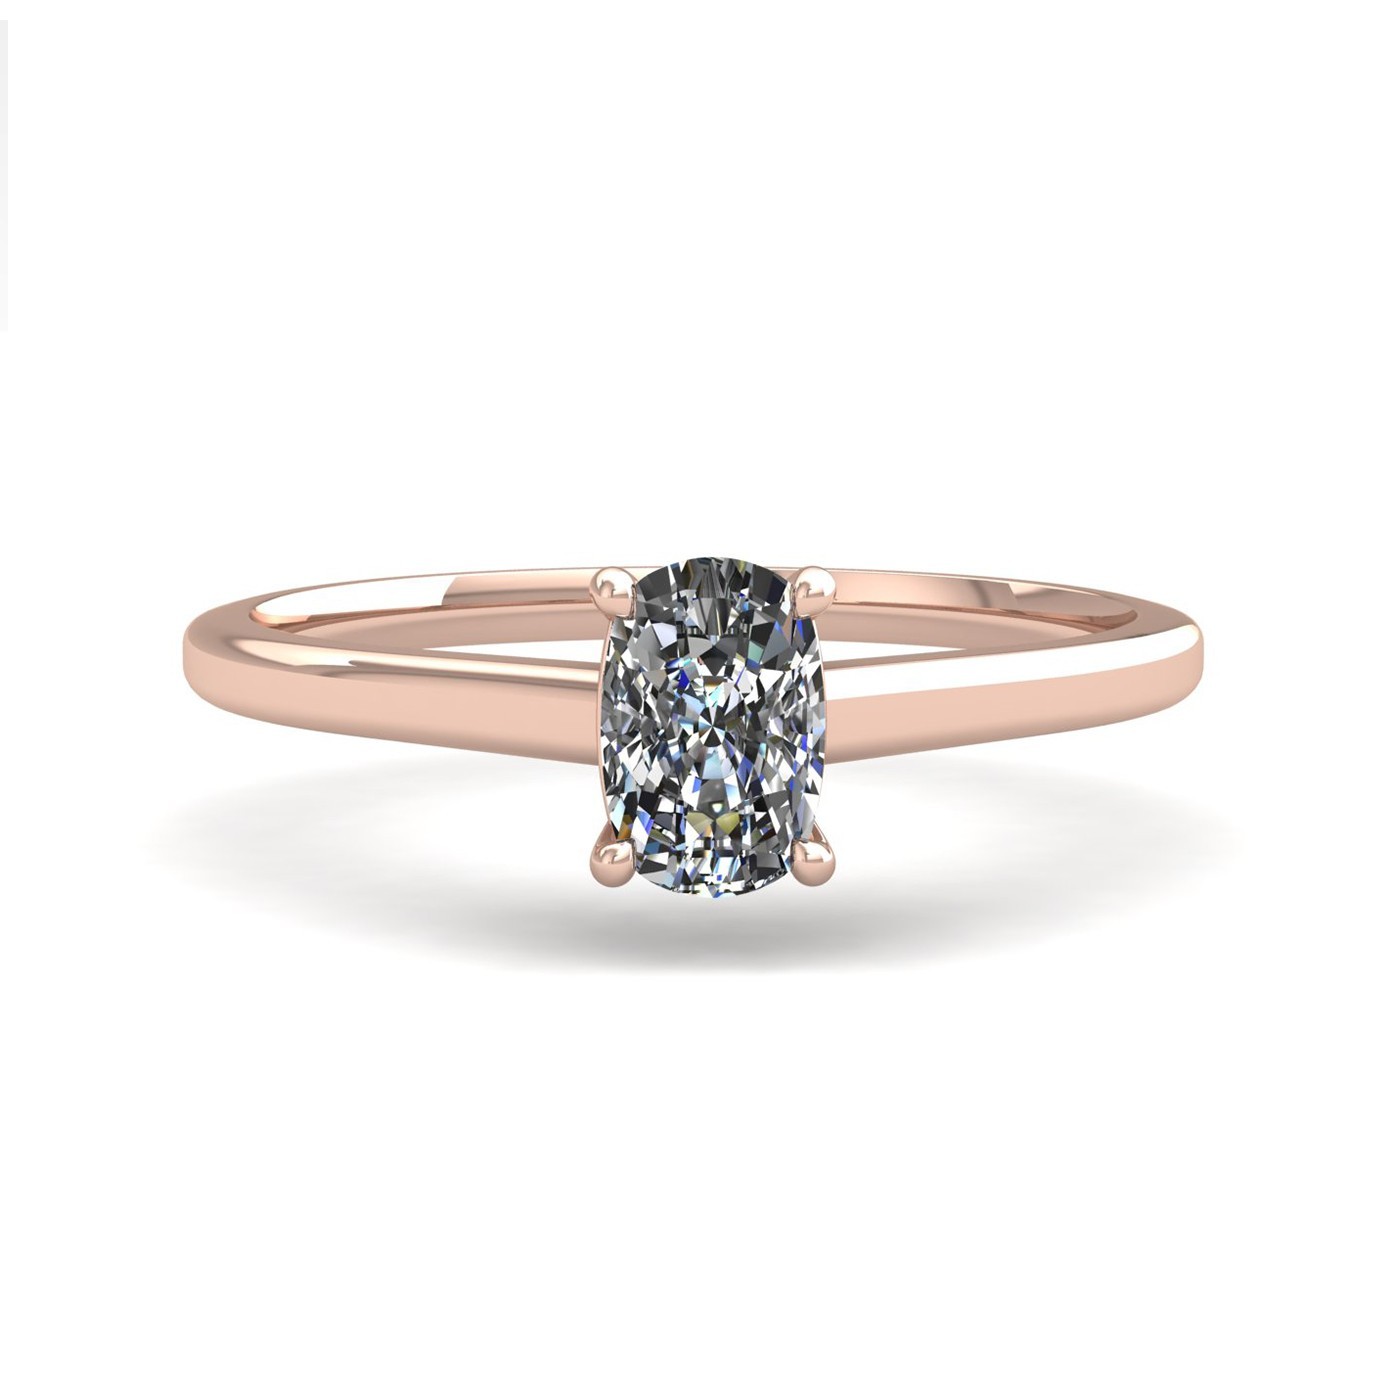 18k rose gold  1.50 ct 4 prongs solitaire elongated cushion cut diamond engagement ring with whisper thin band Photos & images